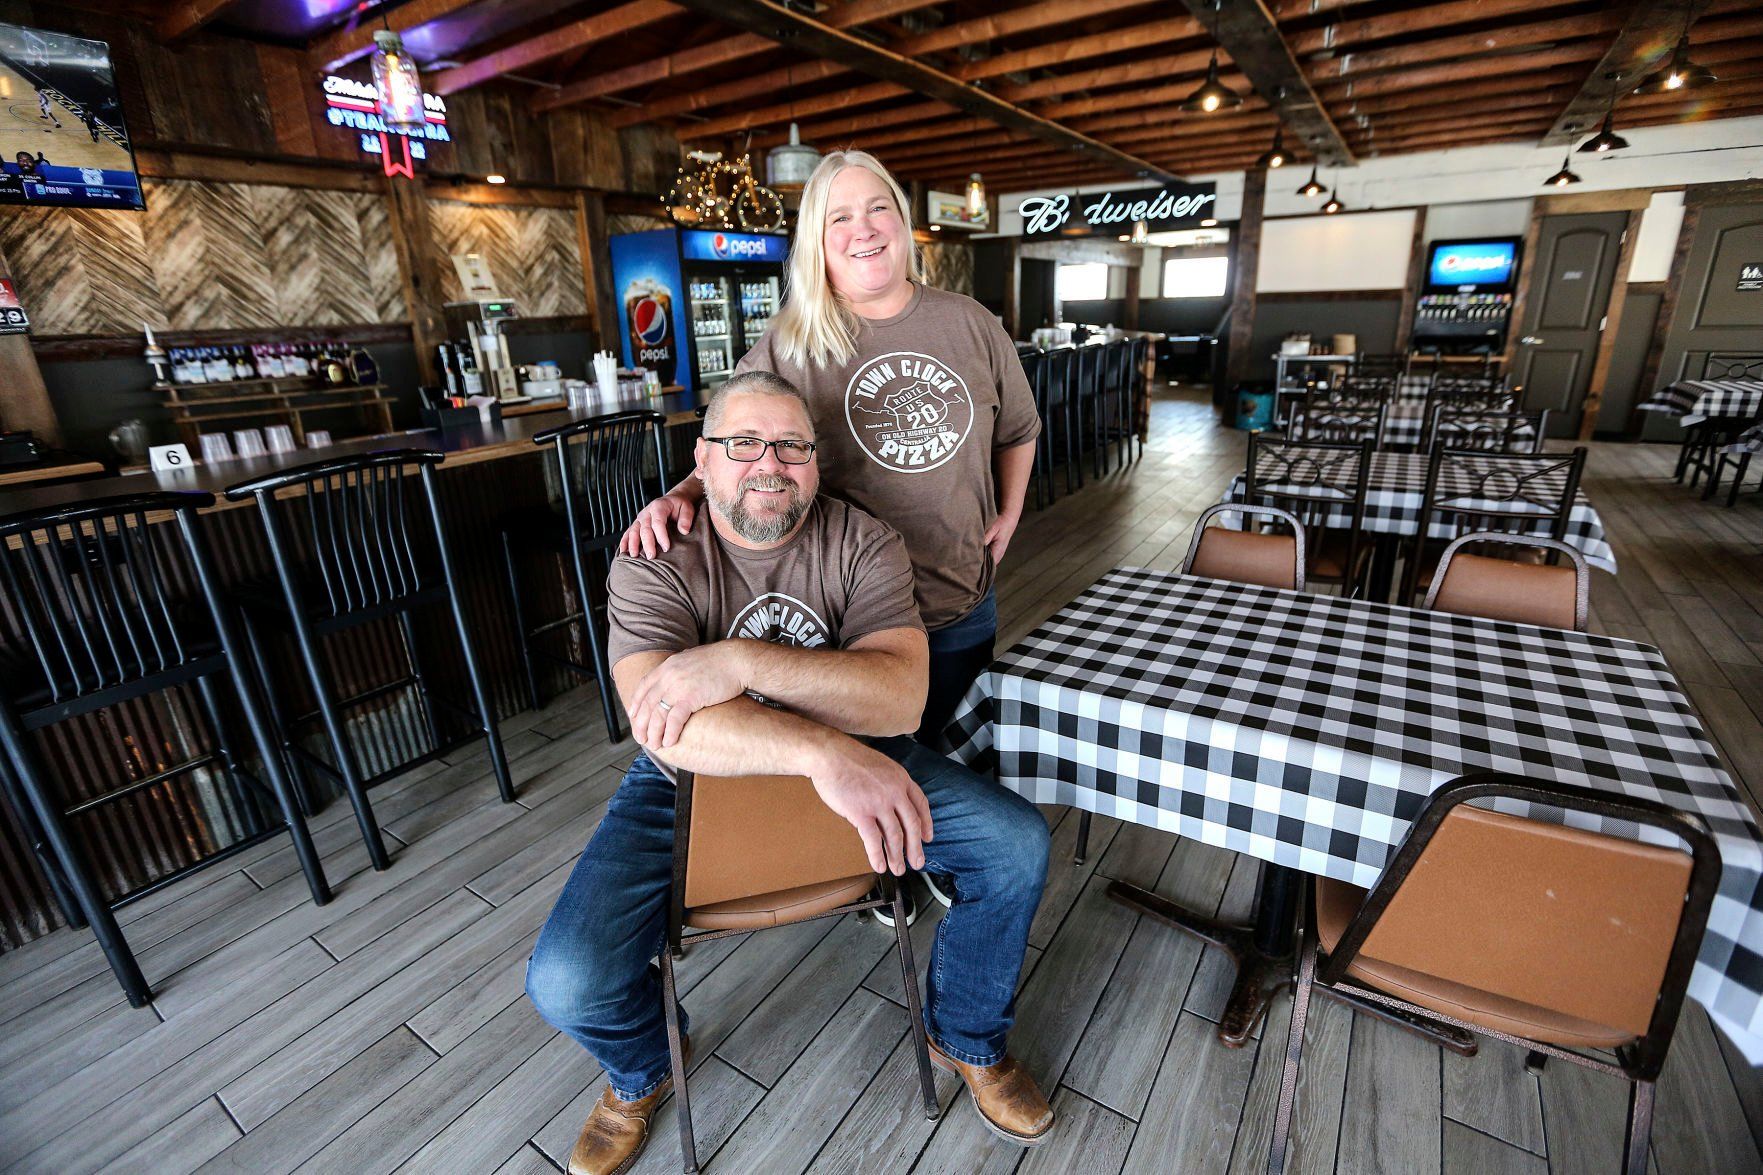 Scott and Irene Nelson are the owners of Town Clock Pizza, which will open on Thursday in Centralia, Iowa. The owners closed their Dubuque Main Street location in April after more than 50 years at the site.    PHOTO CREDIT: Dave Kettering